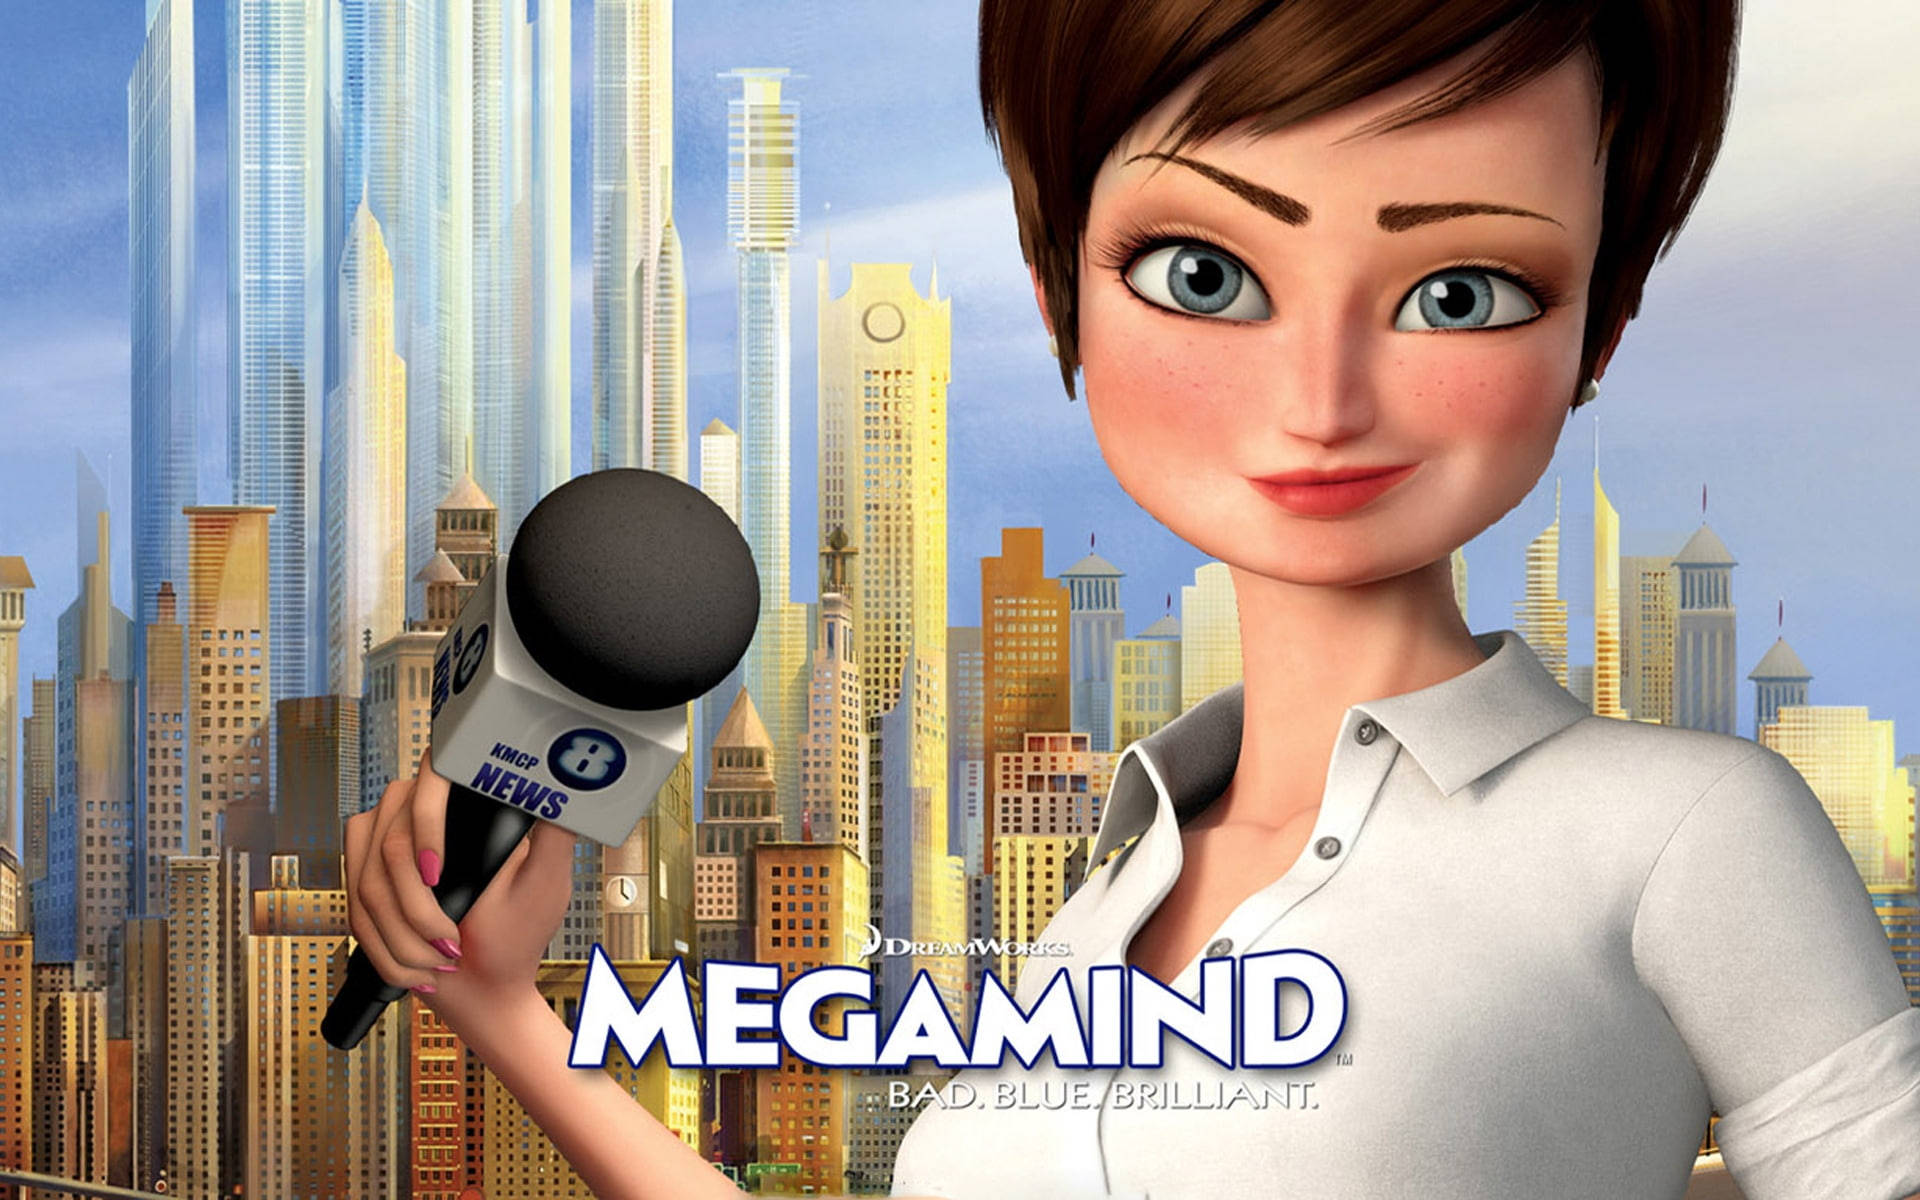 Roxanne Ritchi From Megamind Wallpaper